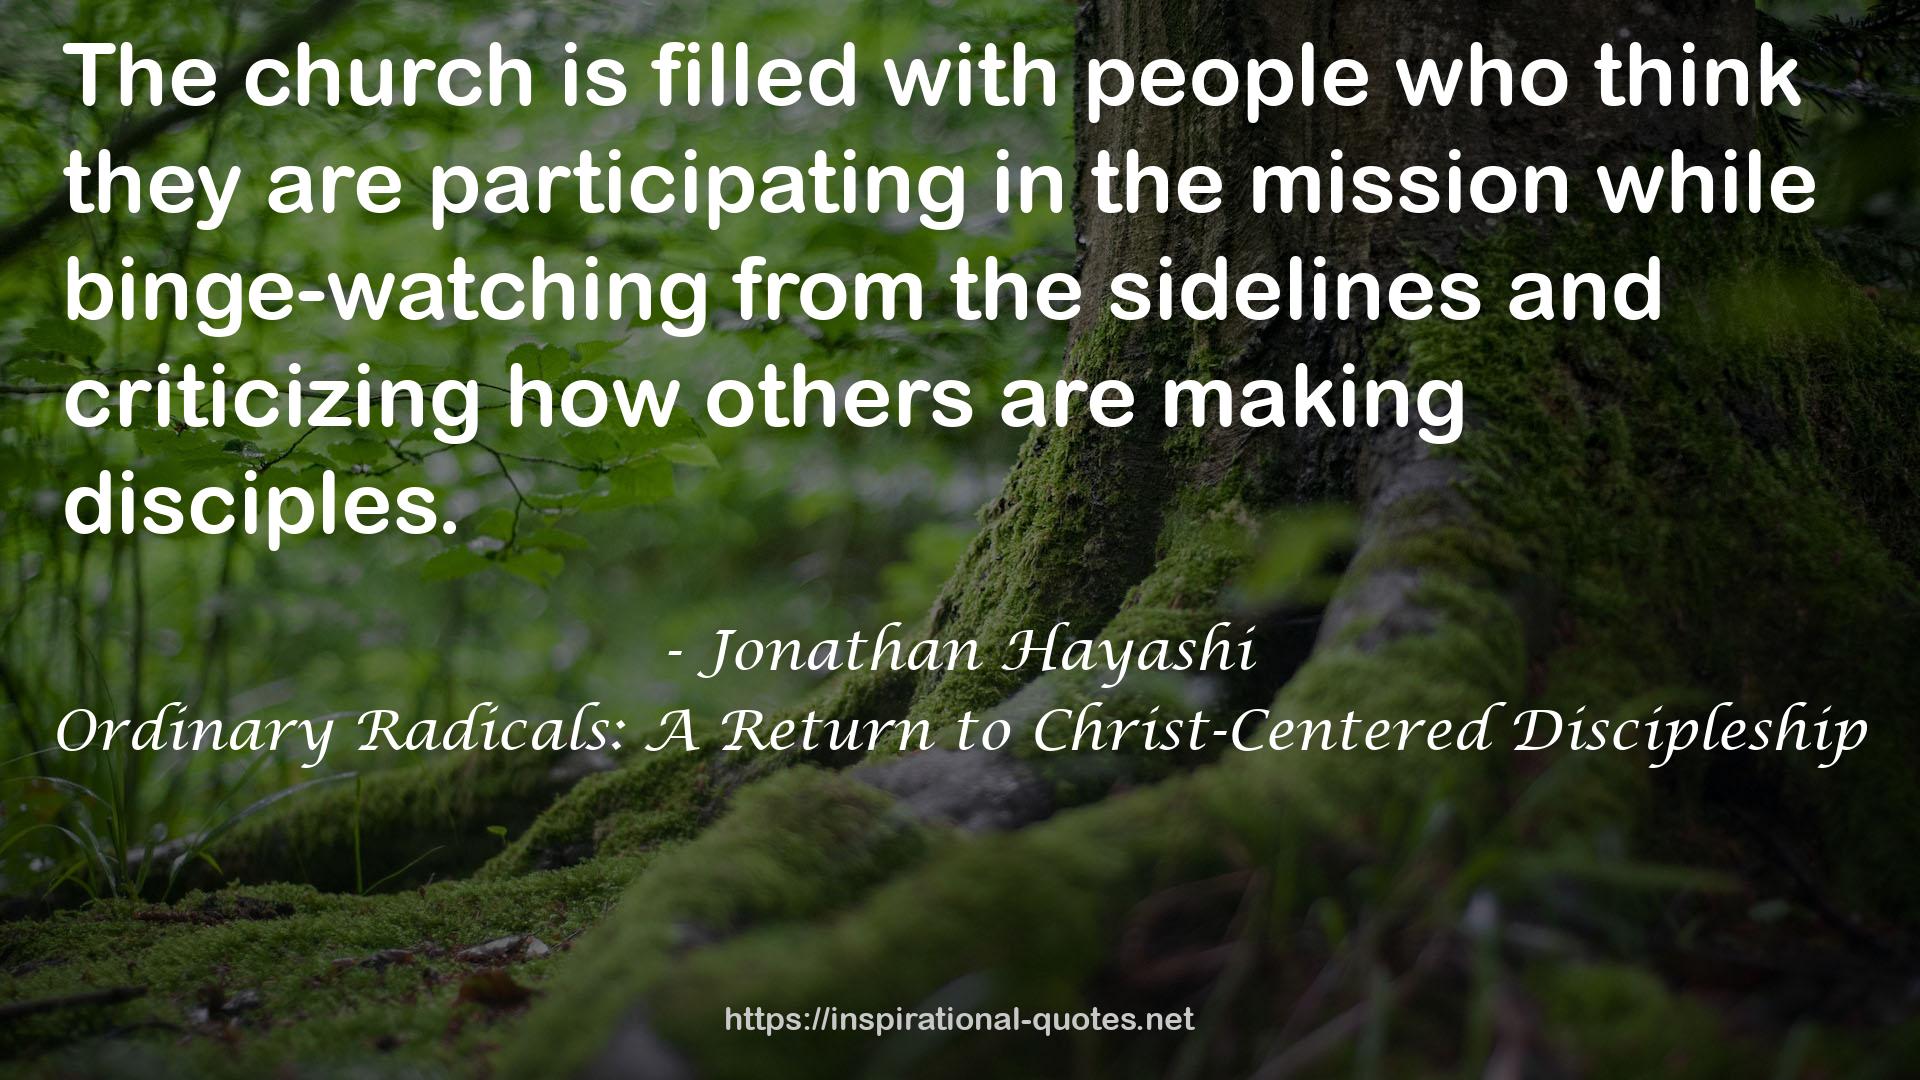 Ordinary Radicals: A Return to Christ-Centered Discipleship QUOTES